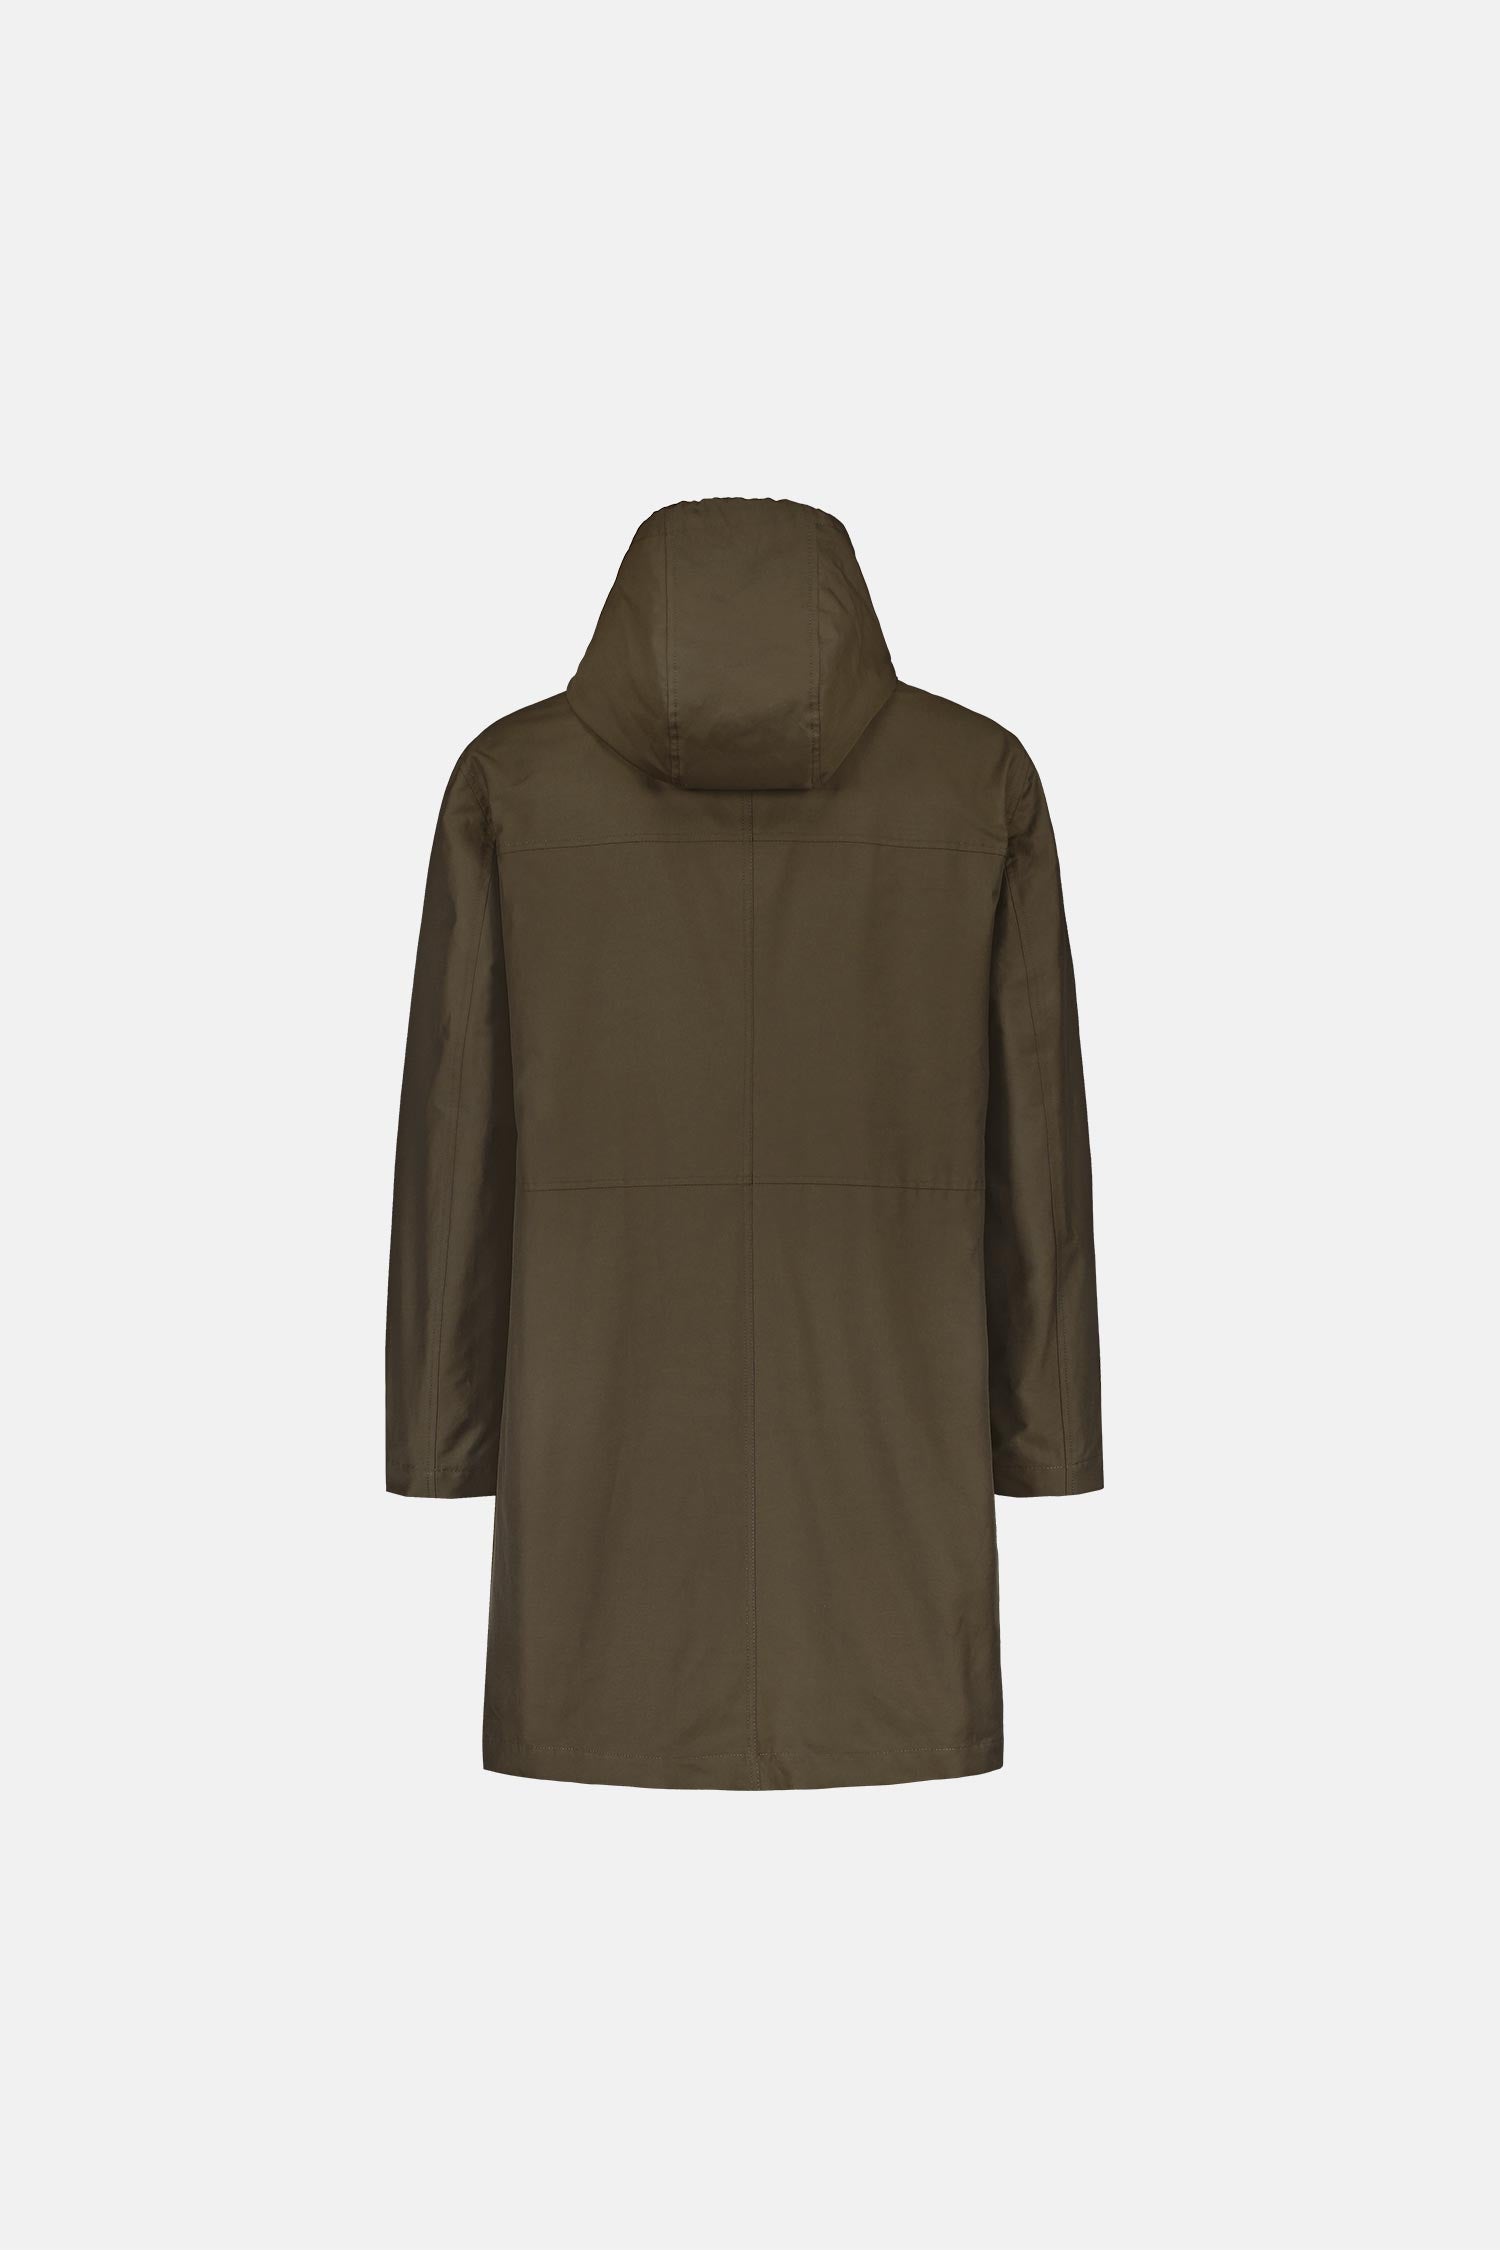 Frenn Paavo sustainable premium quality organic cotton and recycled polyester wind and water repellent parka coat green